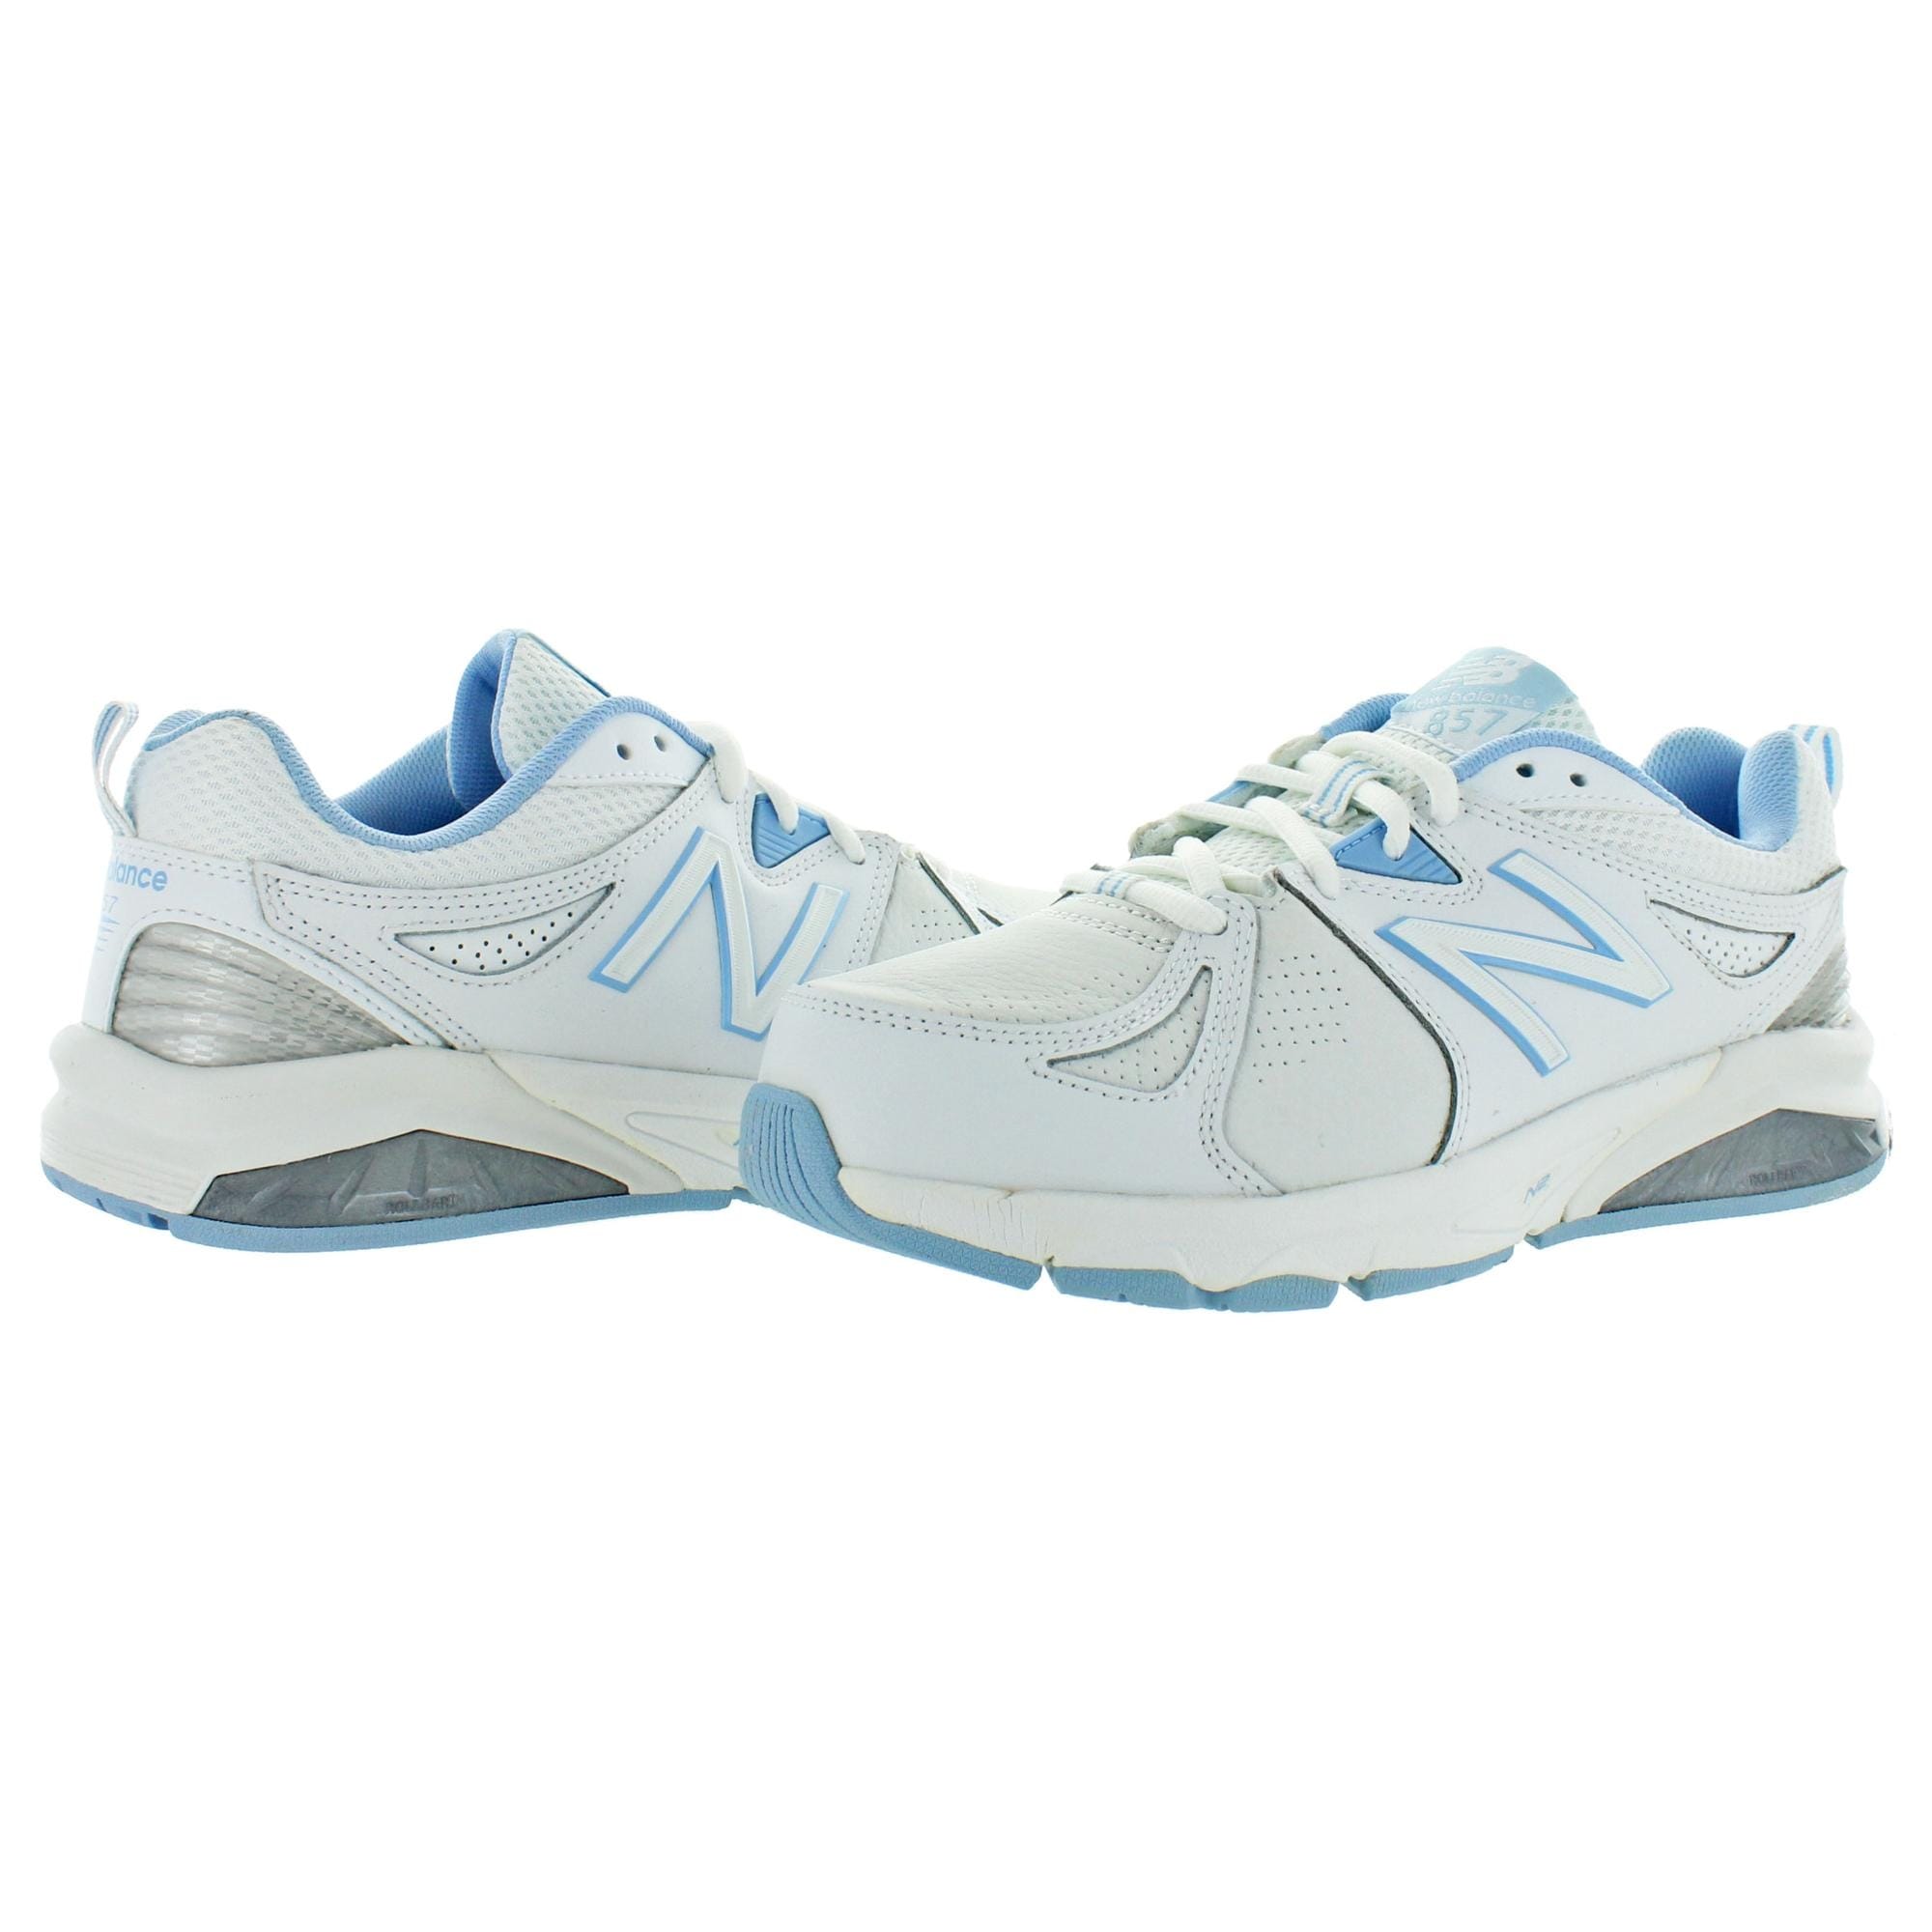 women's athletic training shoes